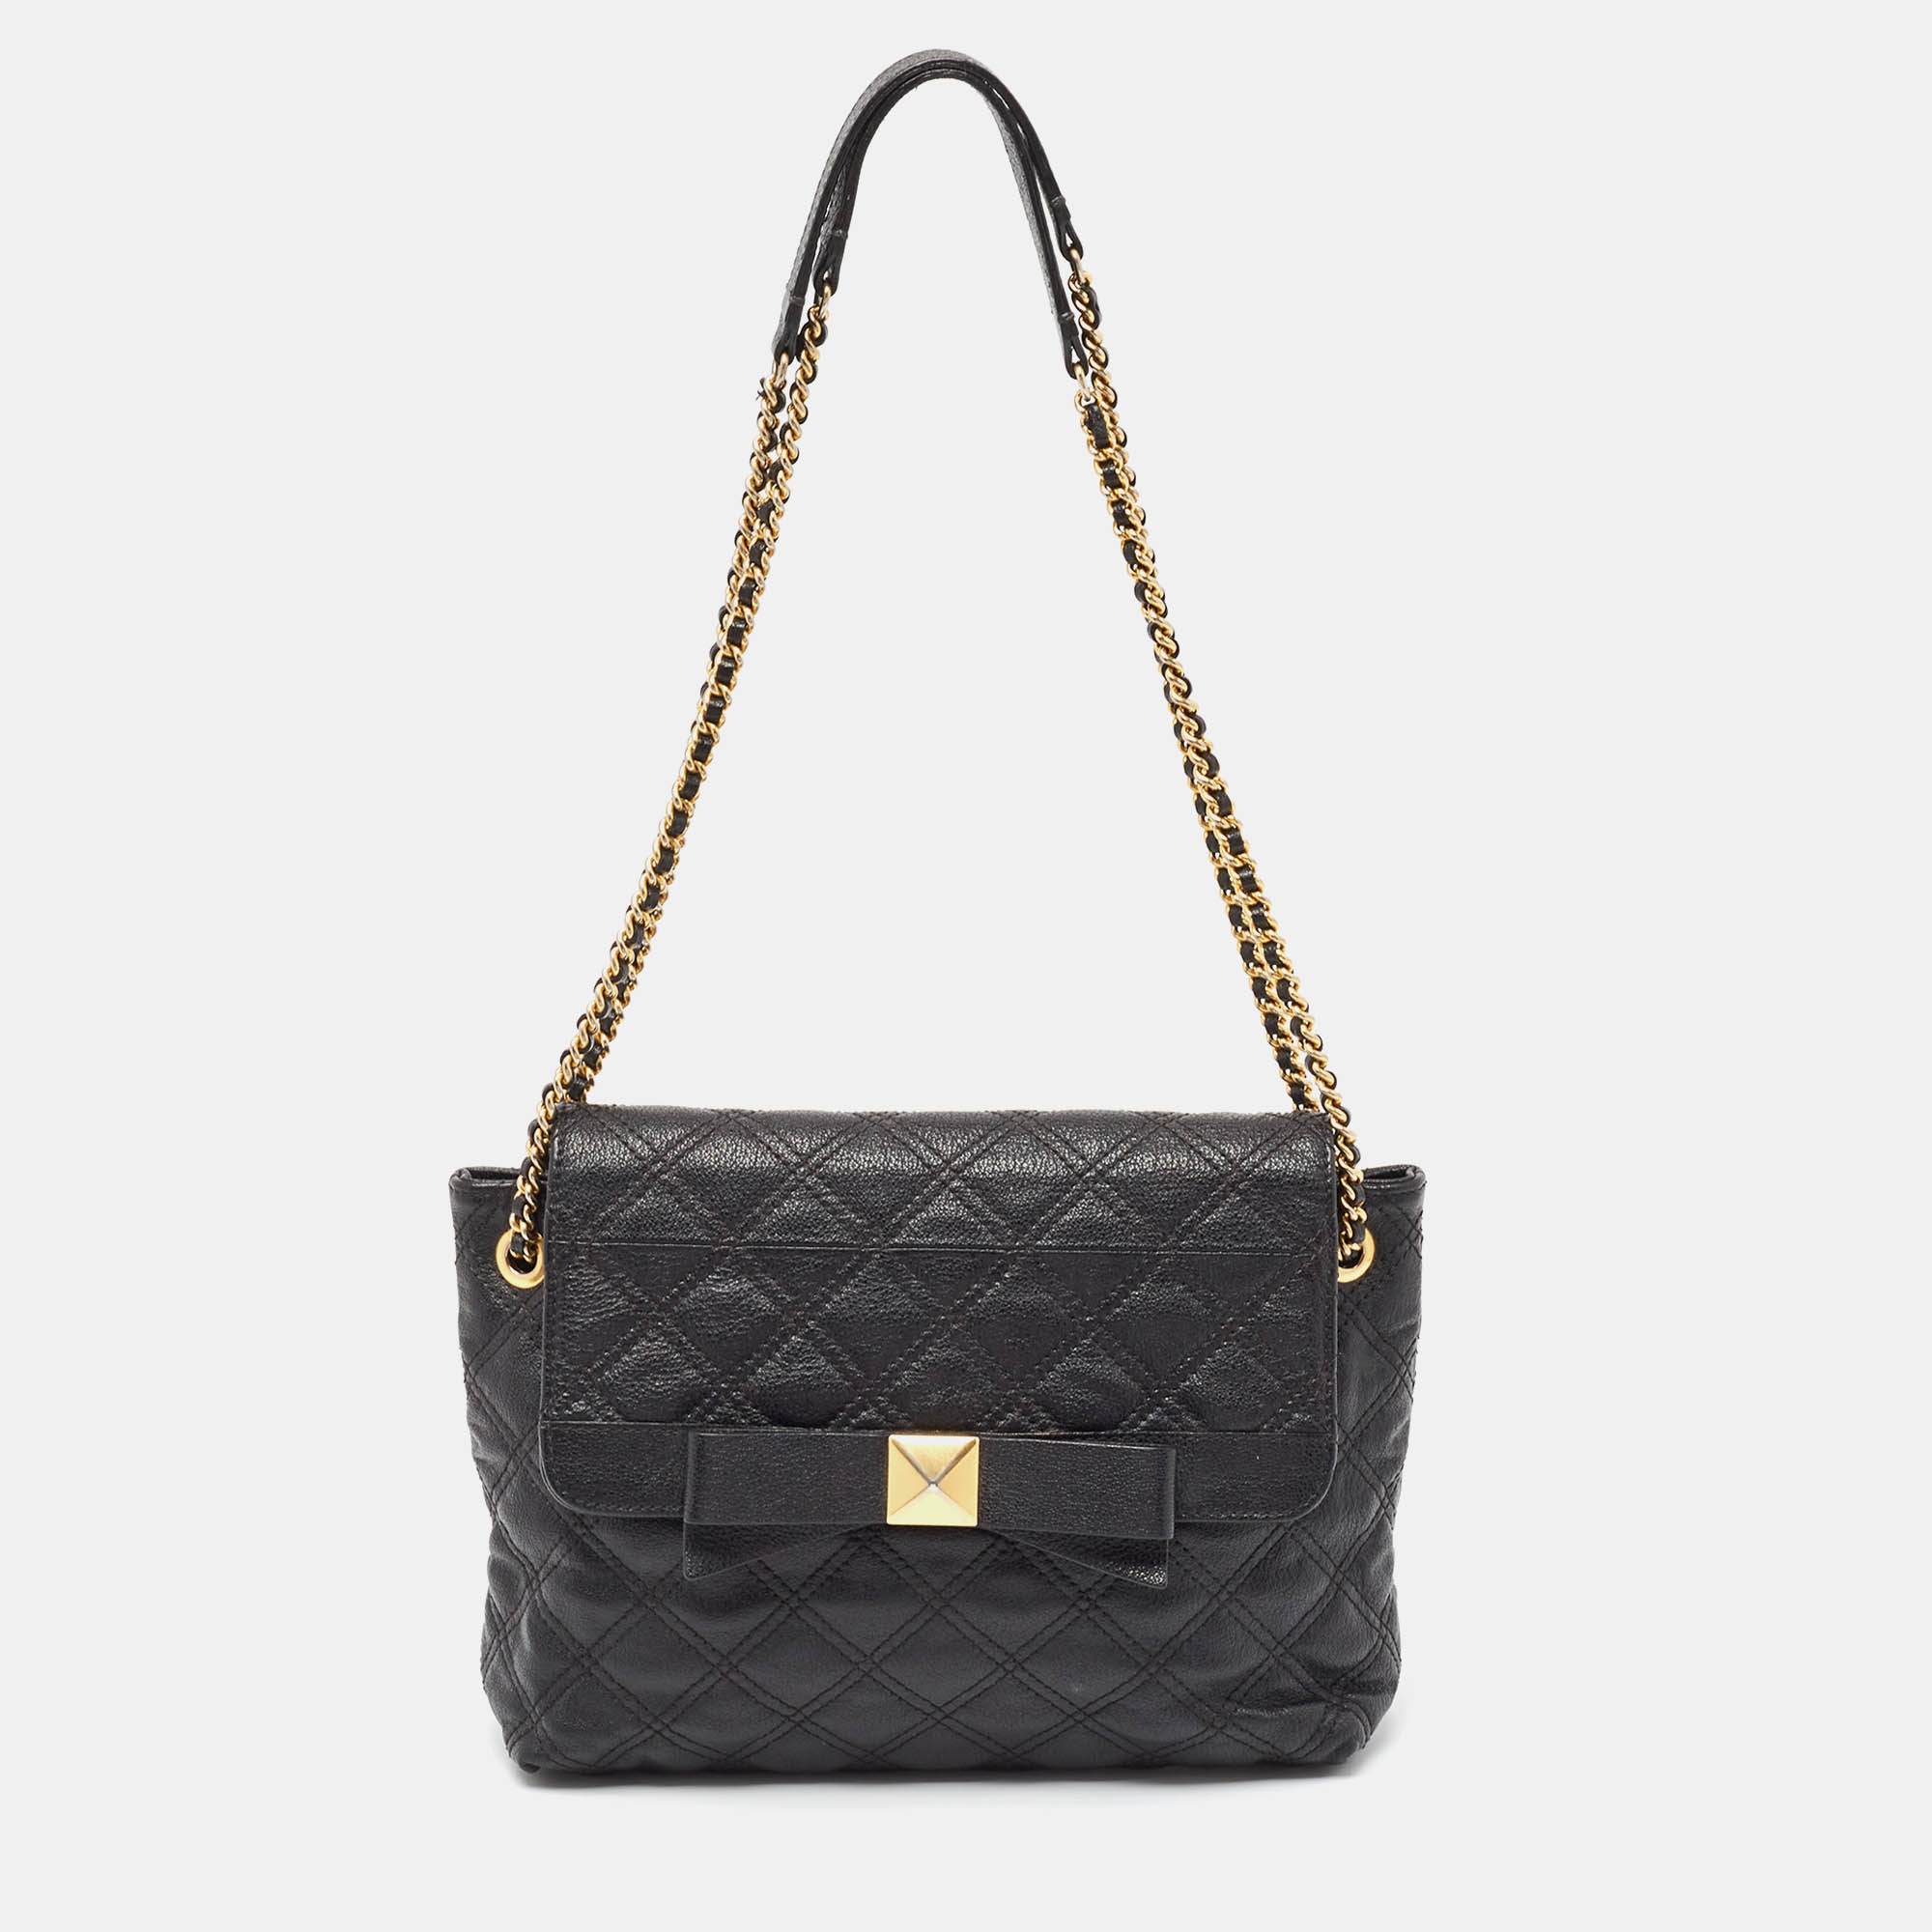 Pre-owned Marc Jacobs Black Quilted Leather Bow Shoulder Bag